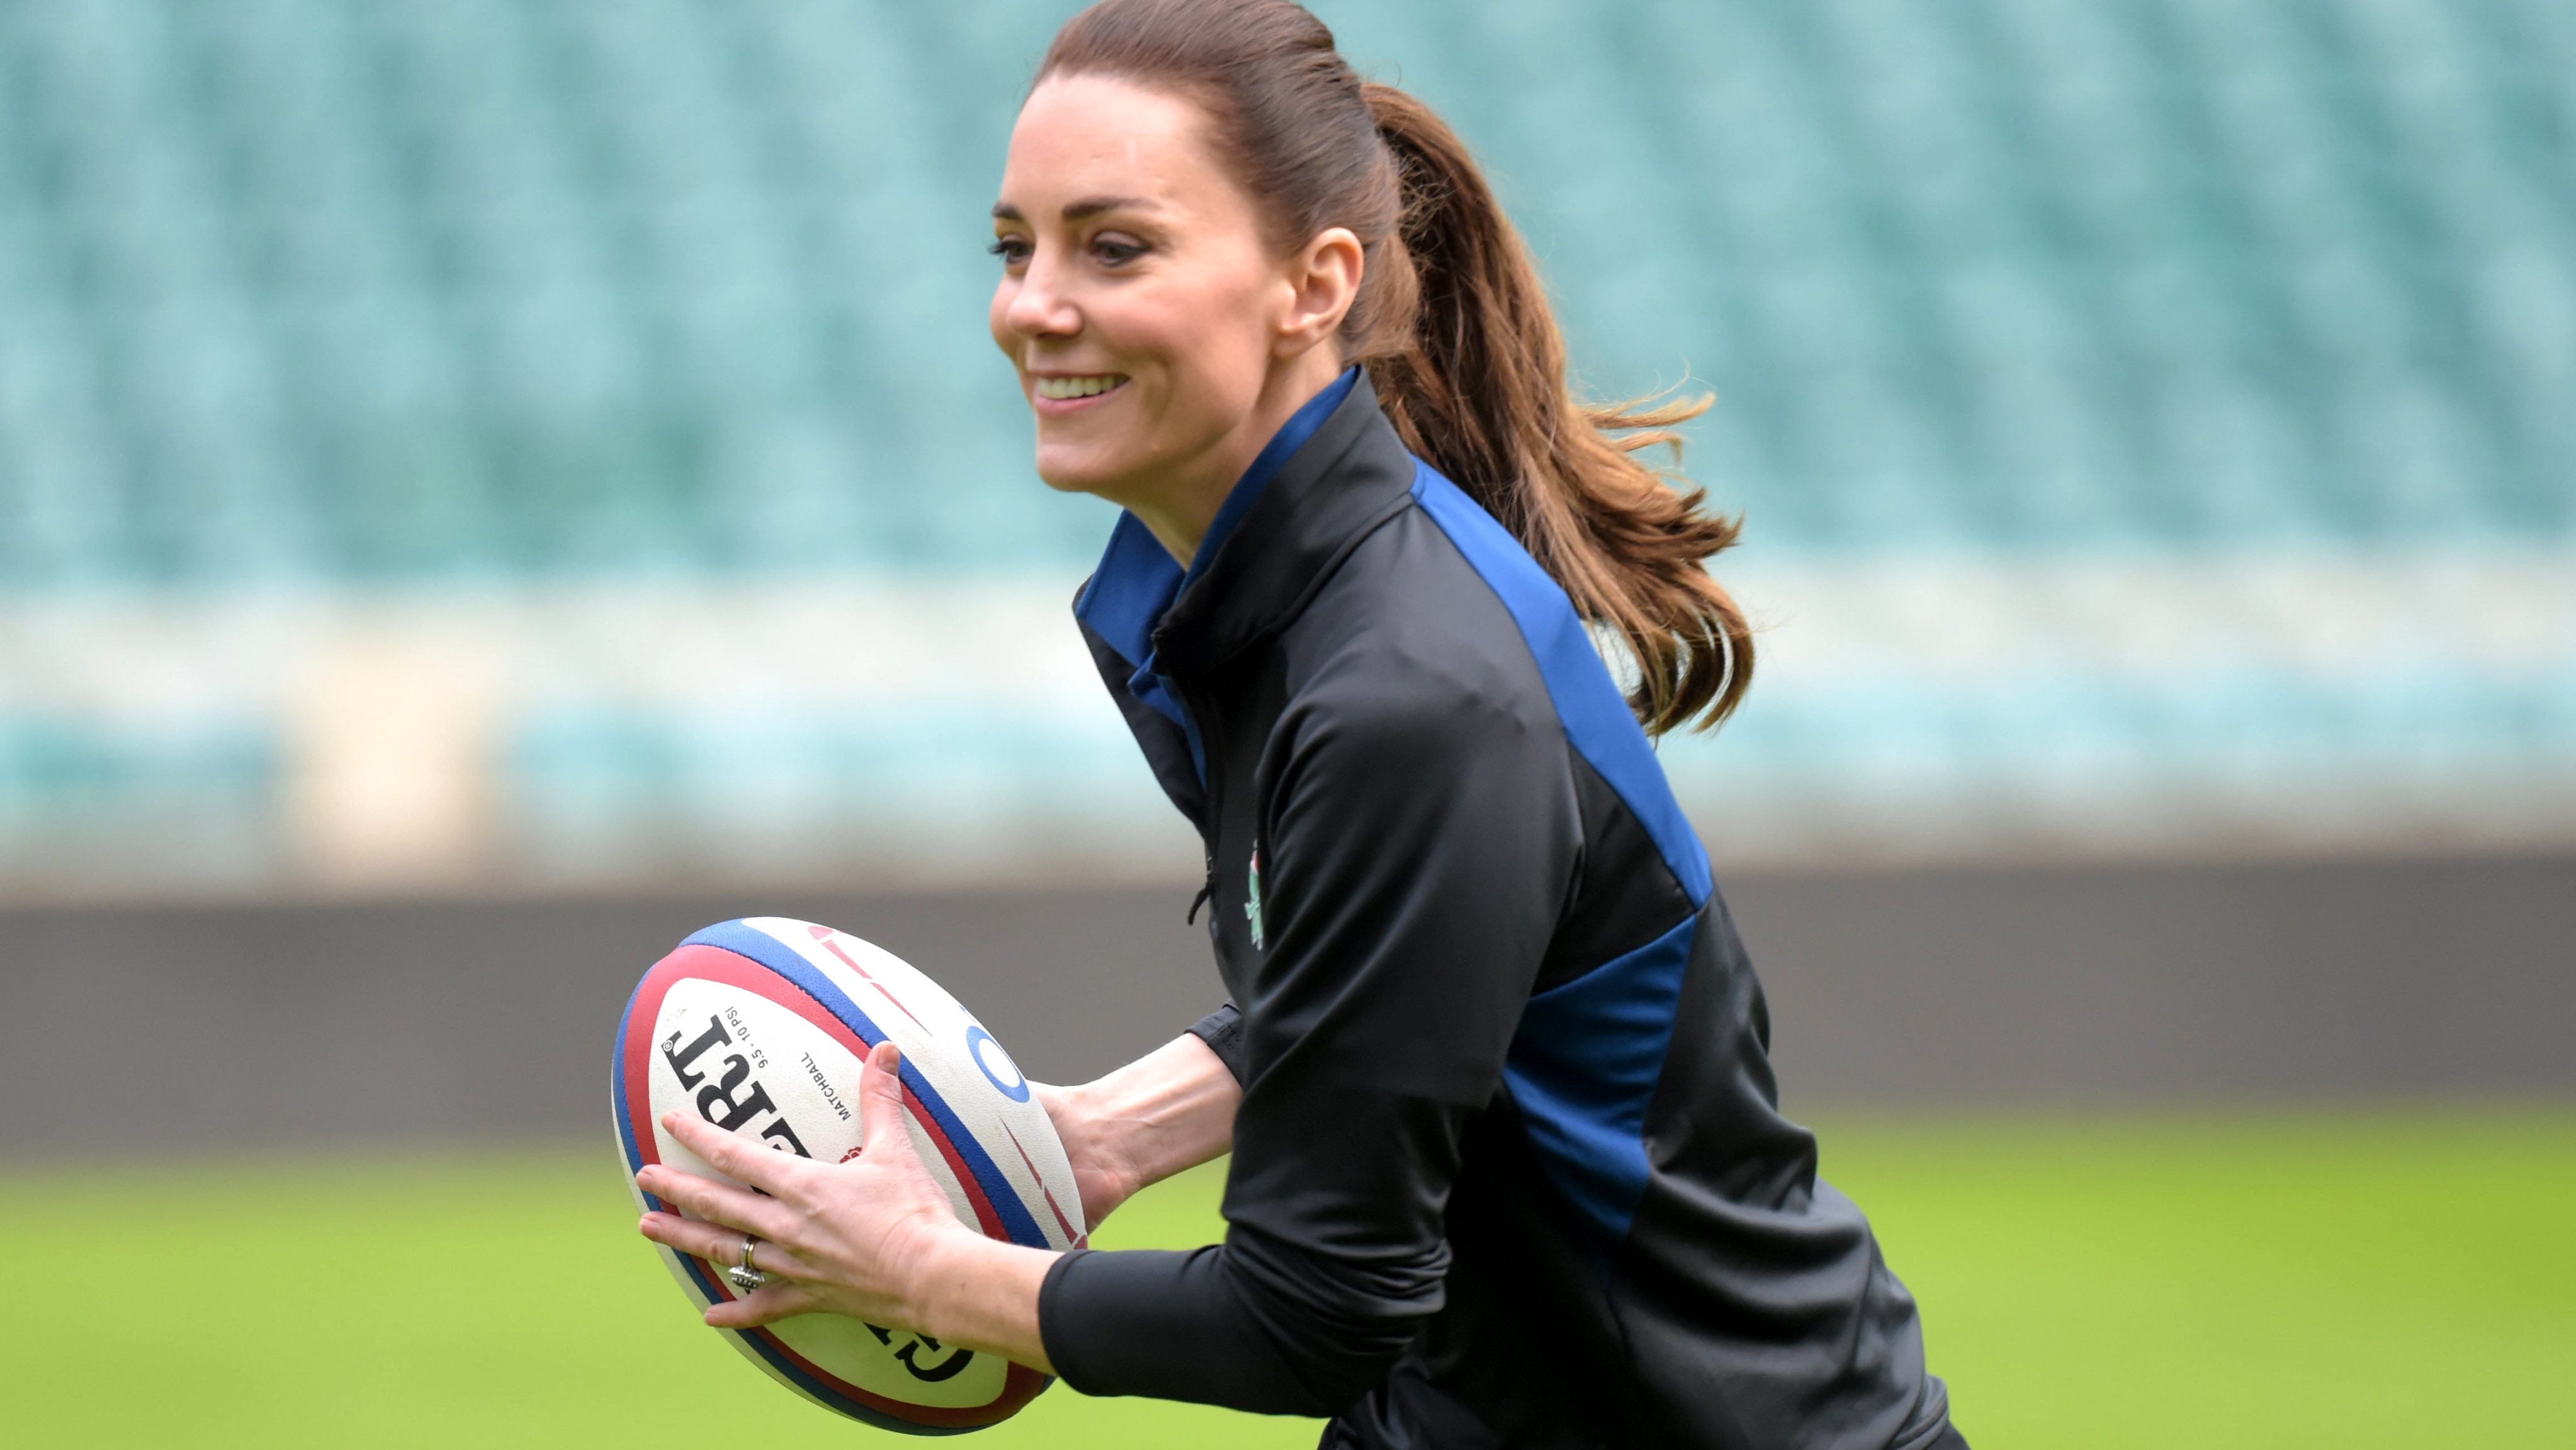 The Duchess of Cambridge Joins England Rugby Training Session